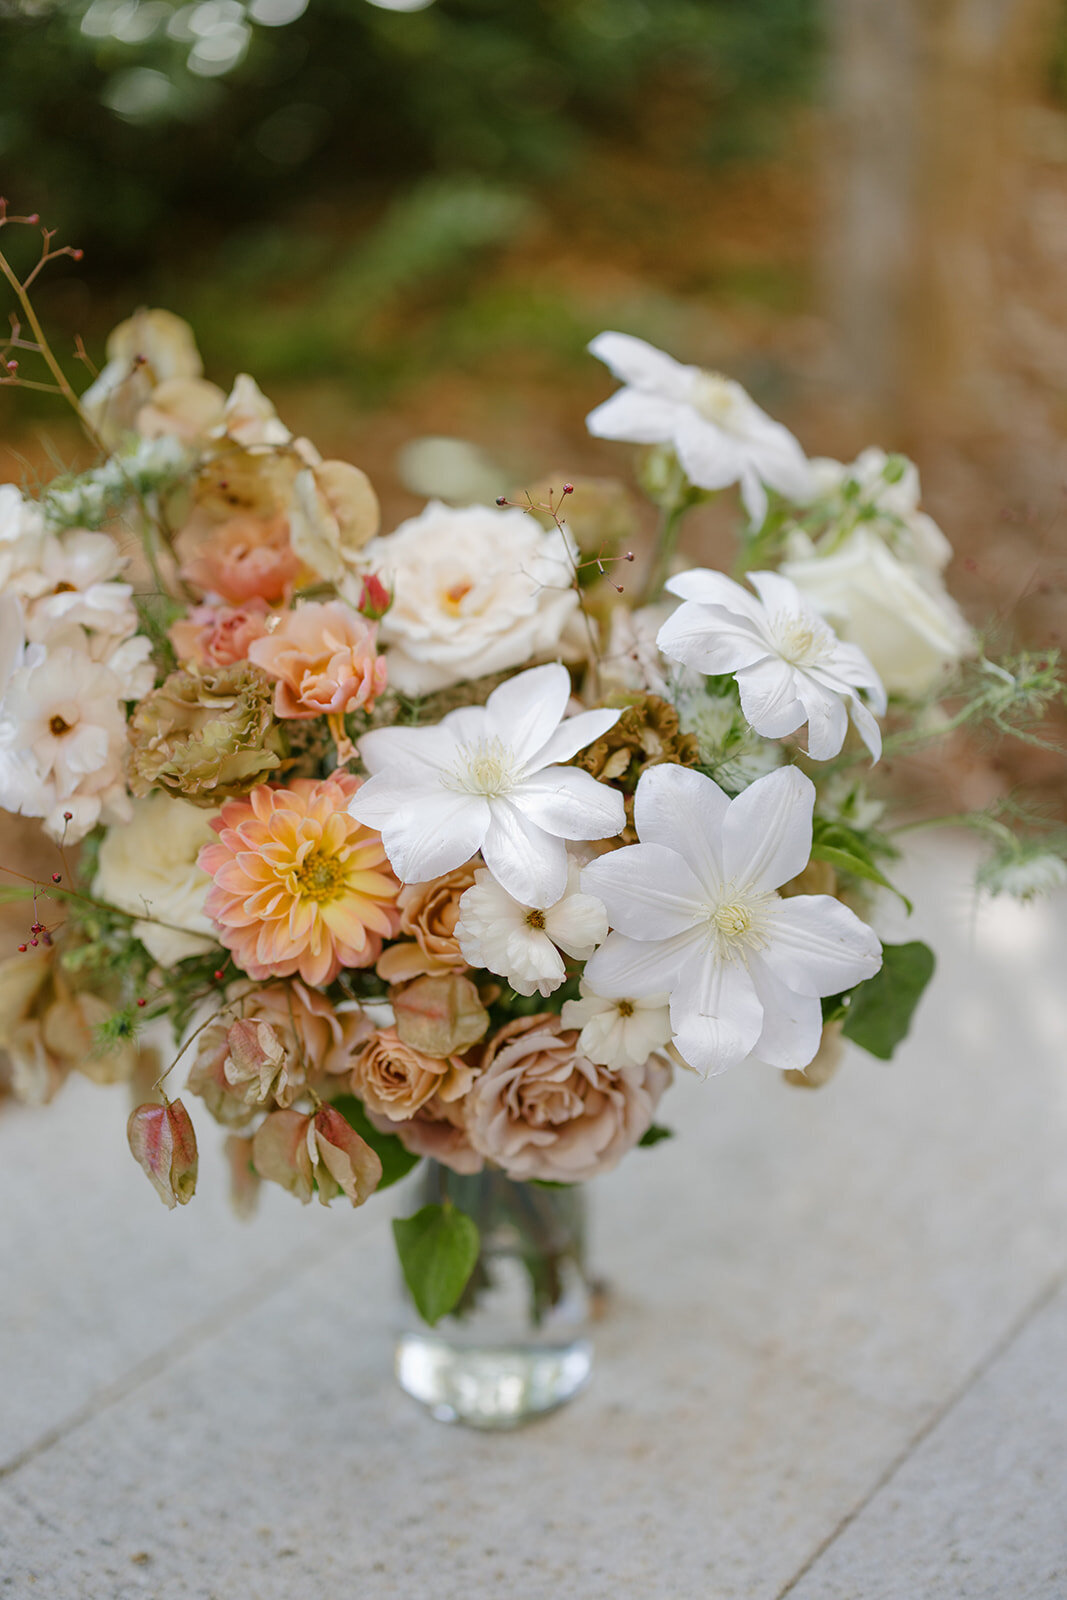 Fall bridal bouquet with lush autumnal colors of mauve, dusty pink, cream, white, peach, taupe, and green. Florals of dahlias, roses, clematis, lisianthus, and natural greenery. Fall wedding in Raleigh, NC. Design by Rosemary and Finch Floral Design in Nashville, TN.